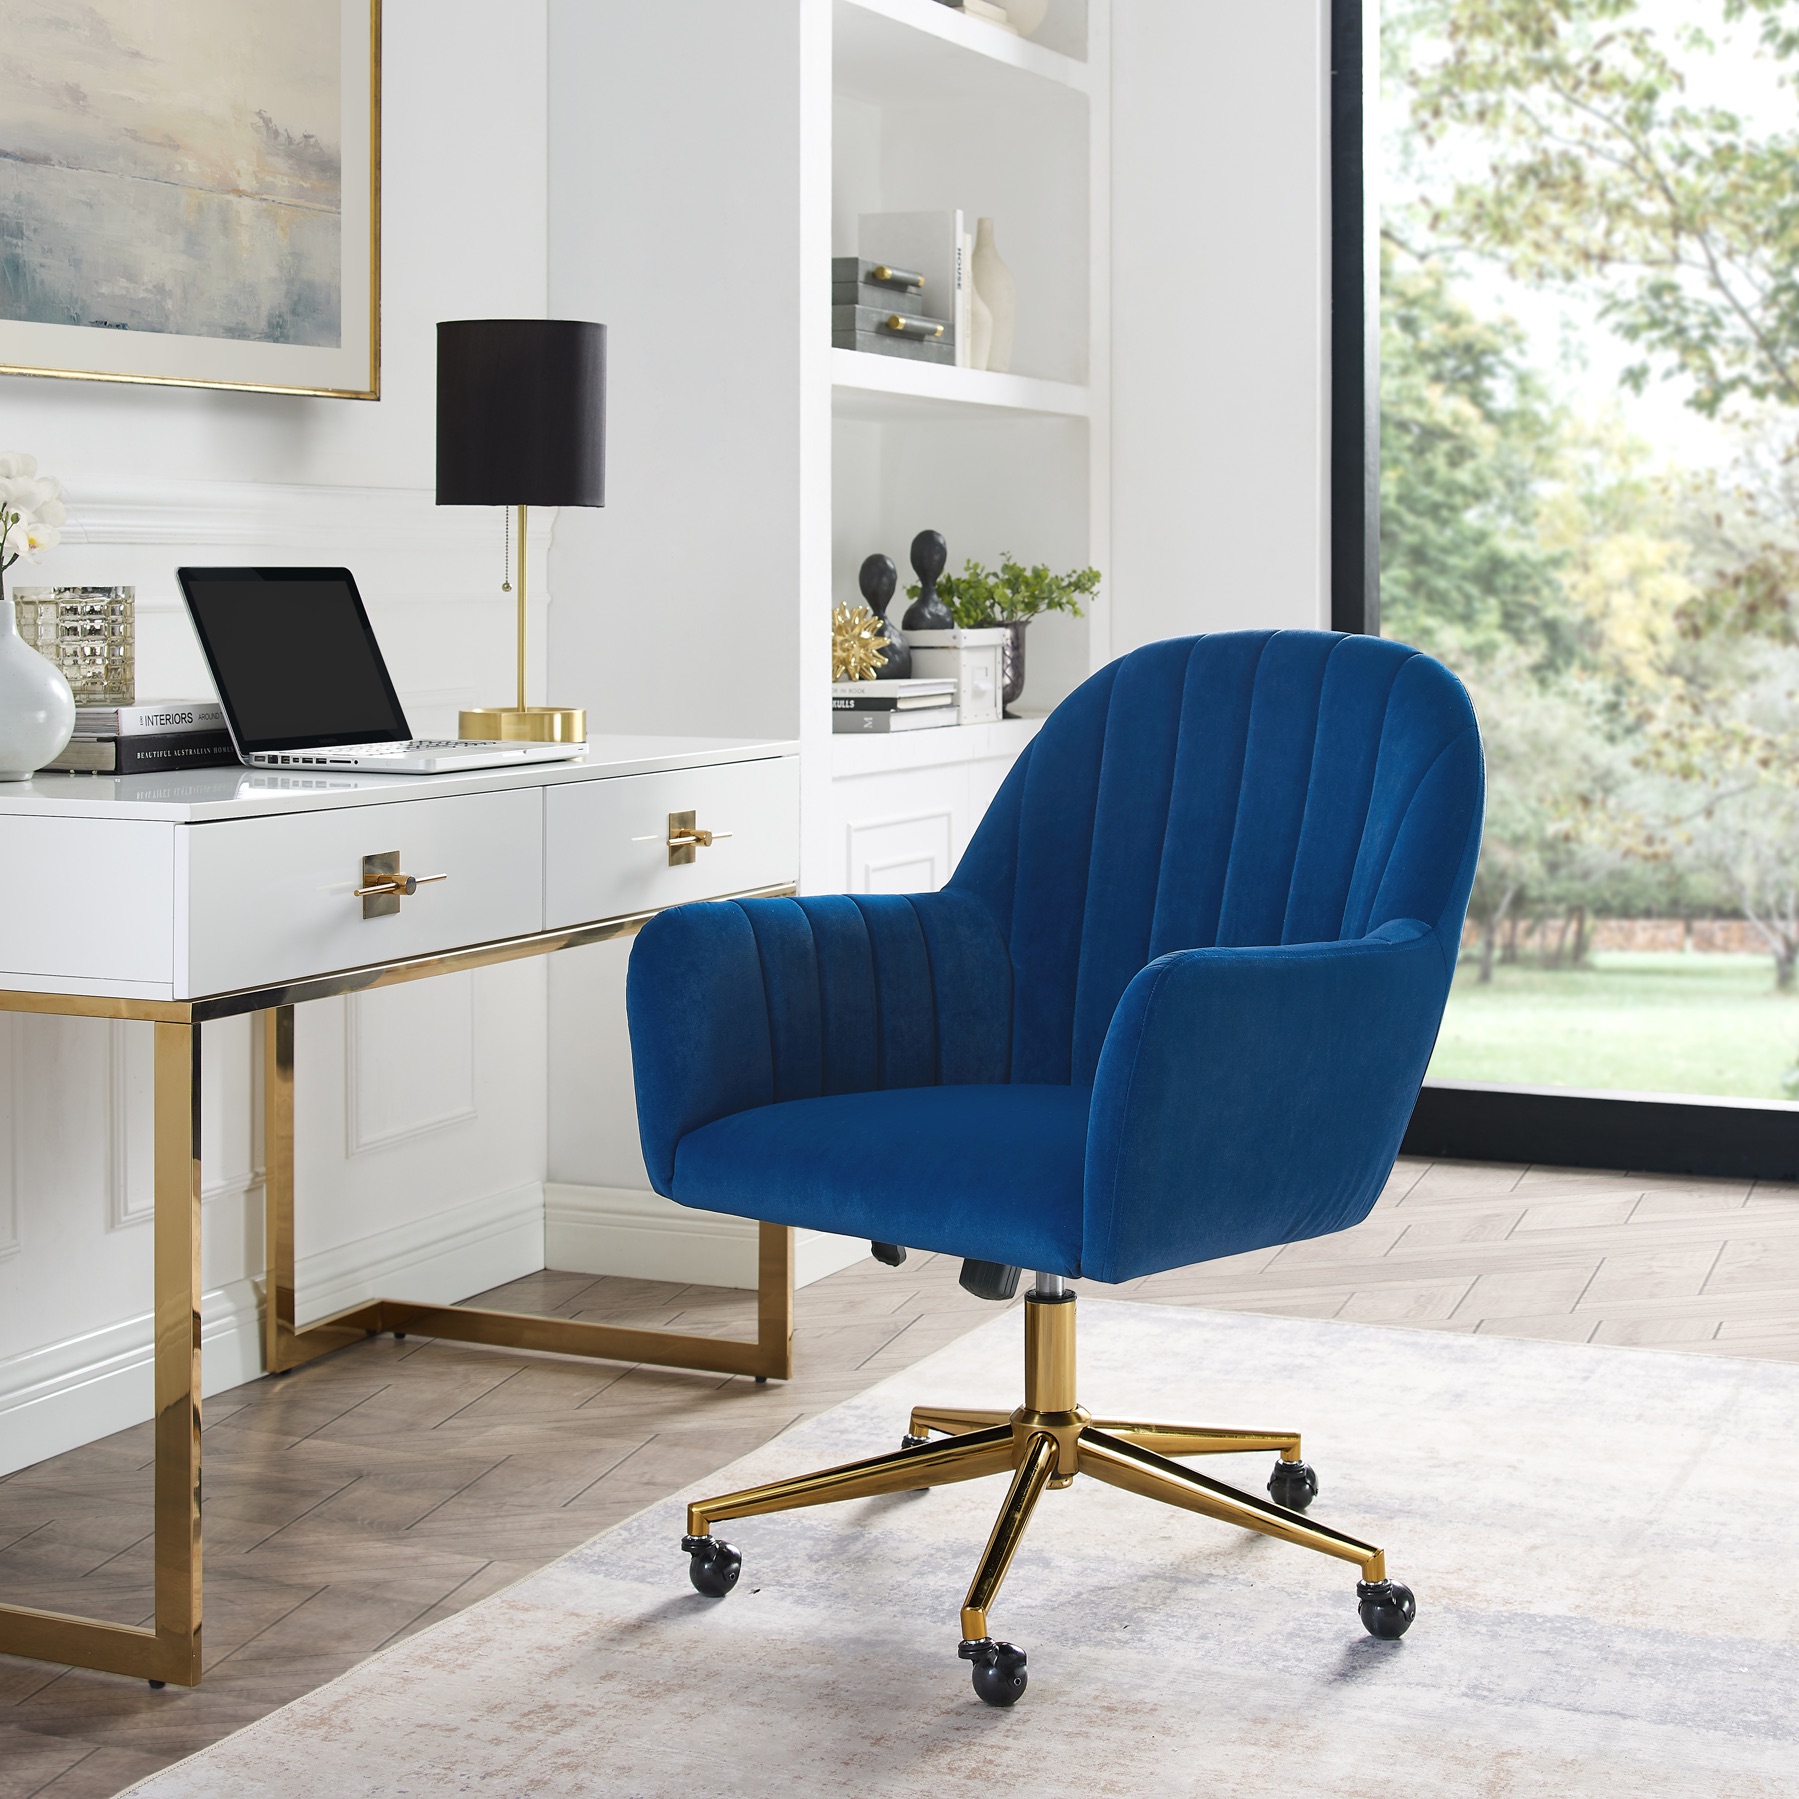 https://www.homethreads.com/files/ach/ds-d274-705-2-channeled-back-office-chair-in-navy-rs1.jpg